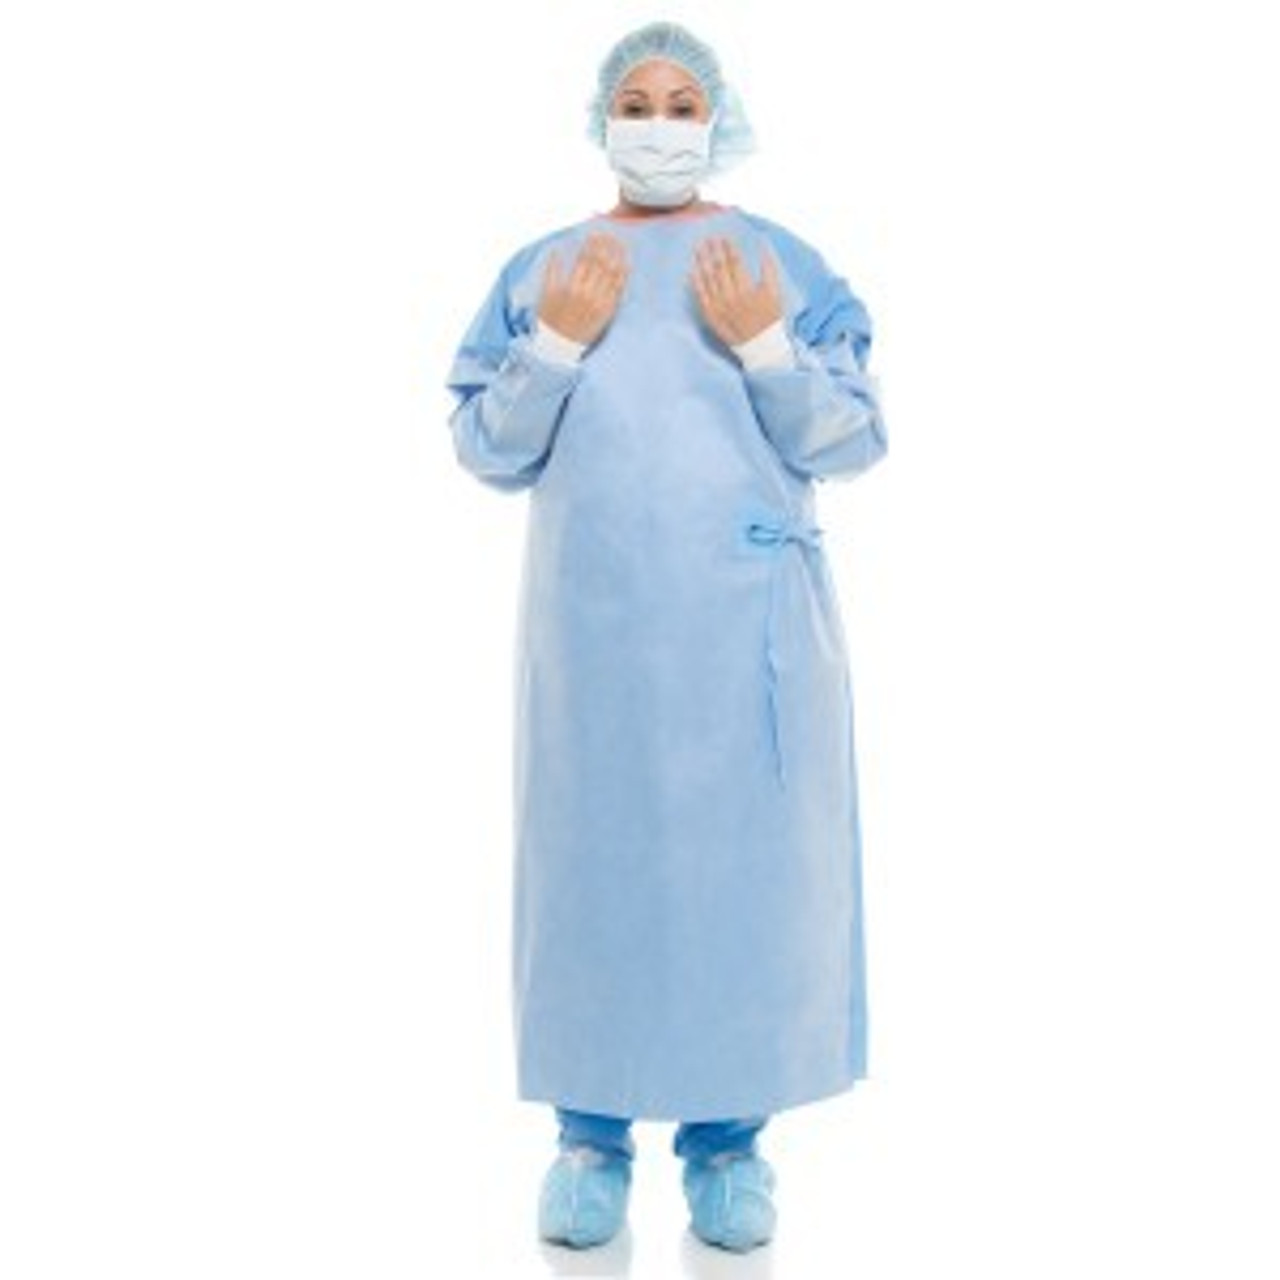 Halyard Kimguard Surgical Gown, Impervious, Sterile, XX-Large, 30/cs